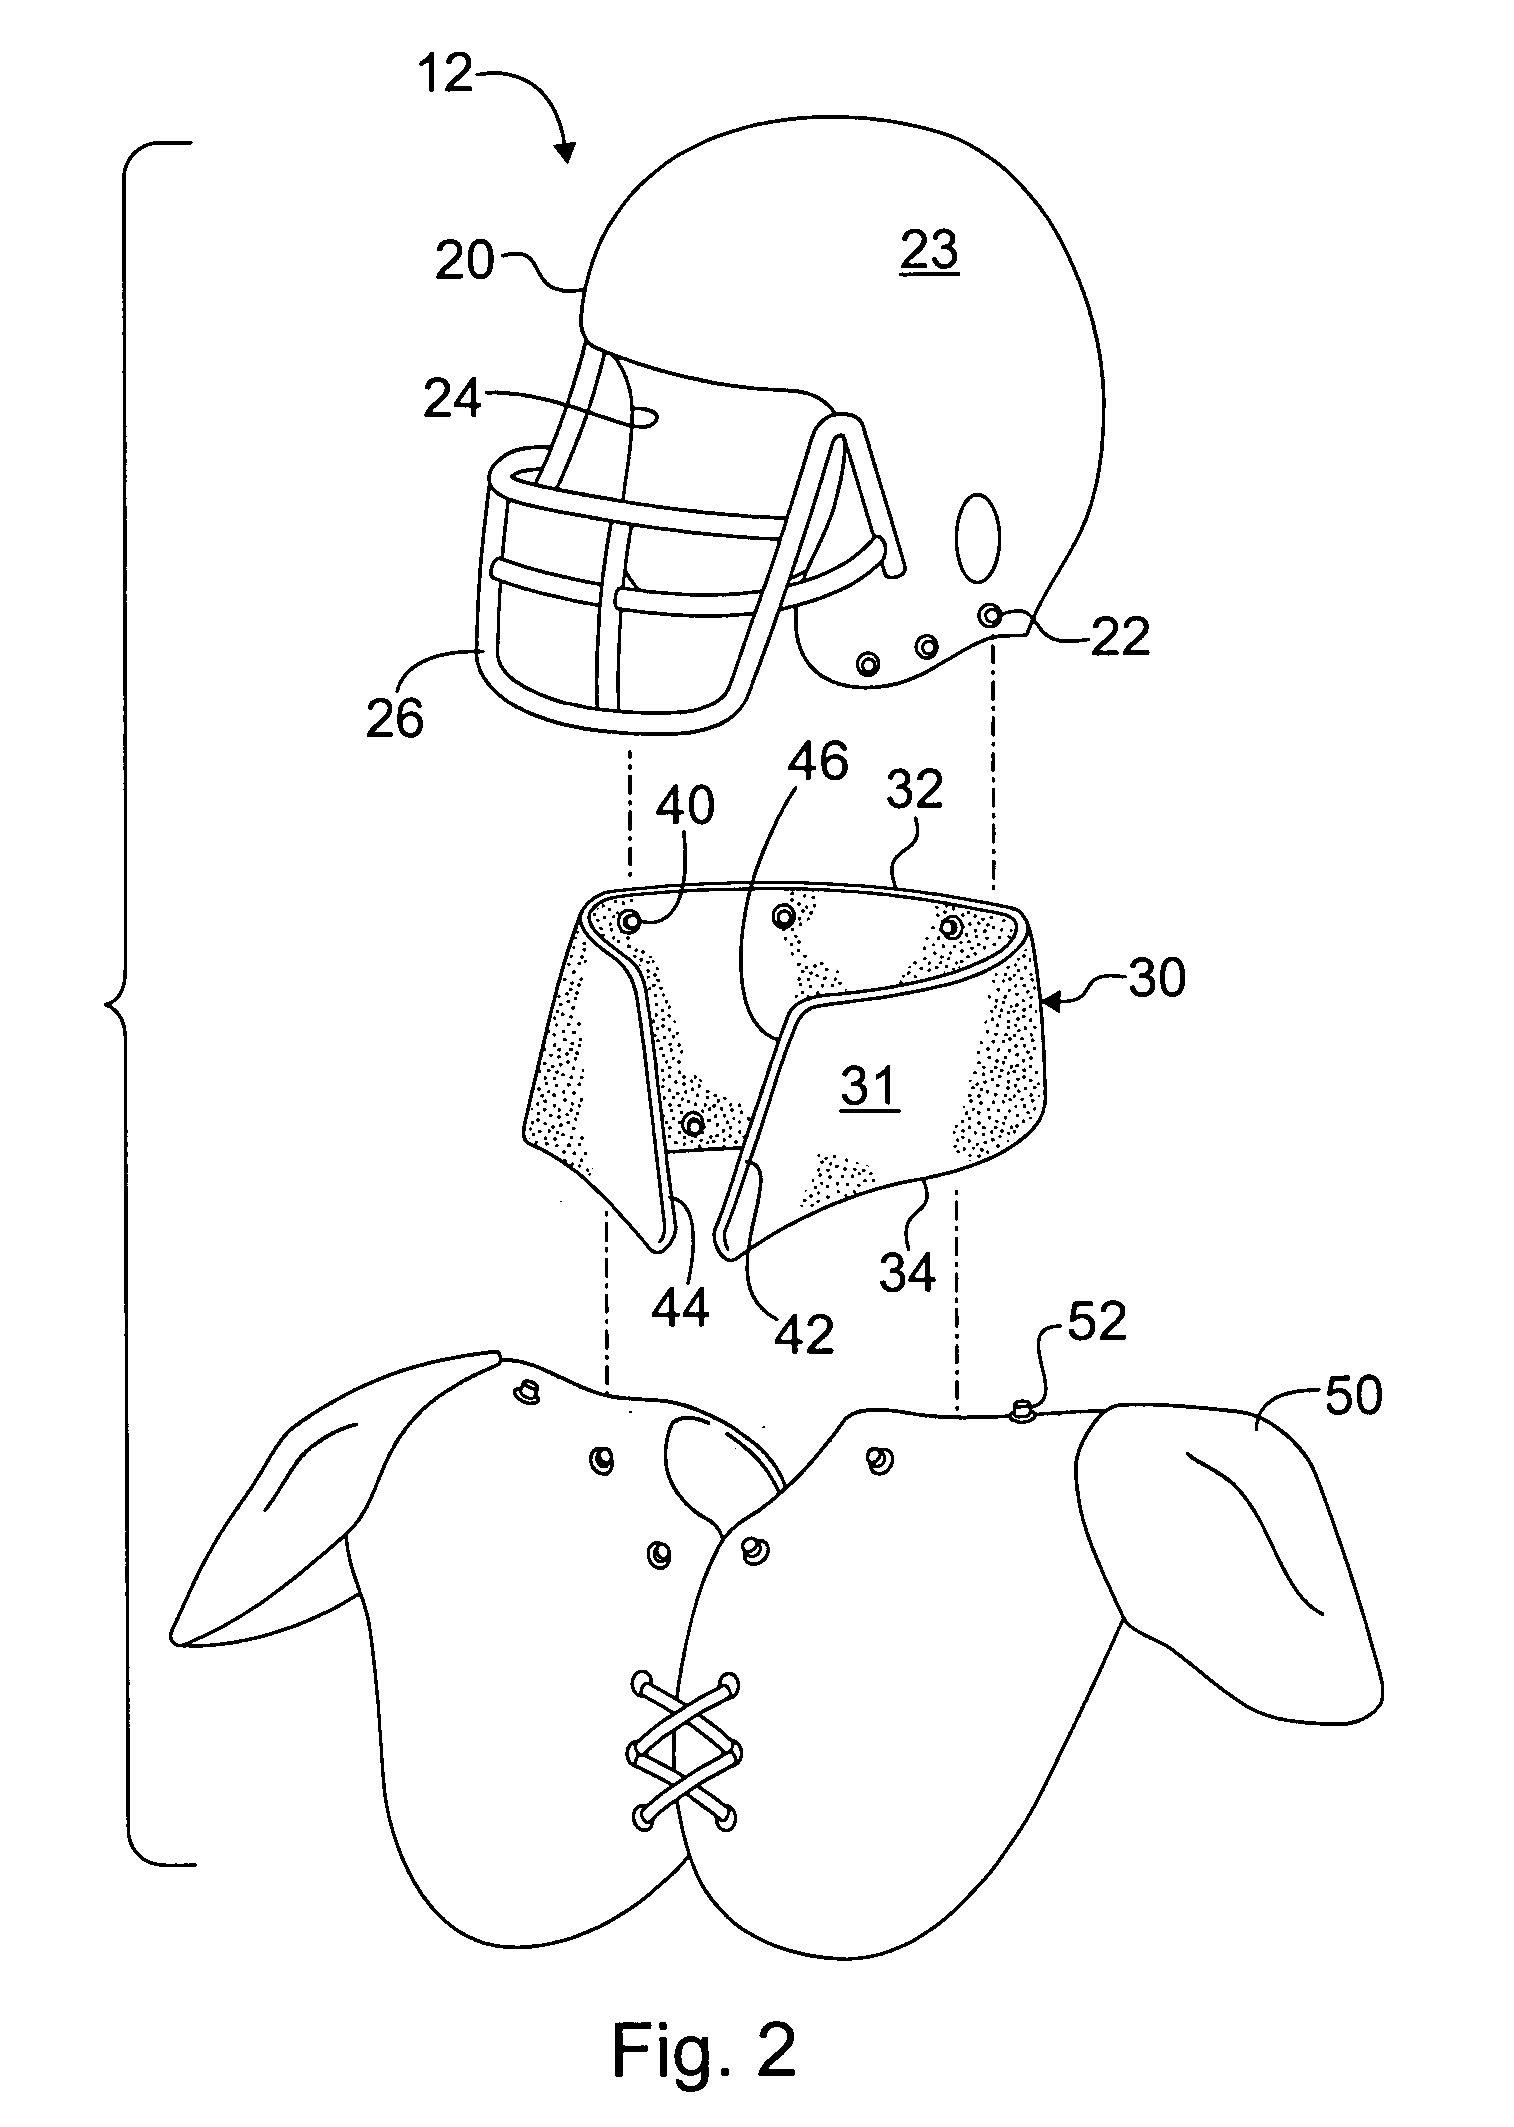 Head and neck protection system